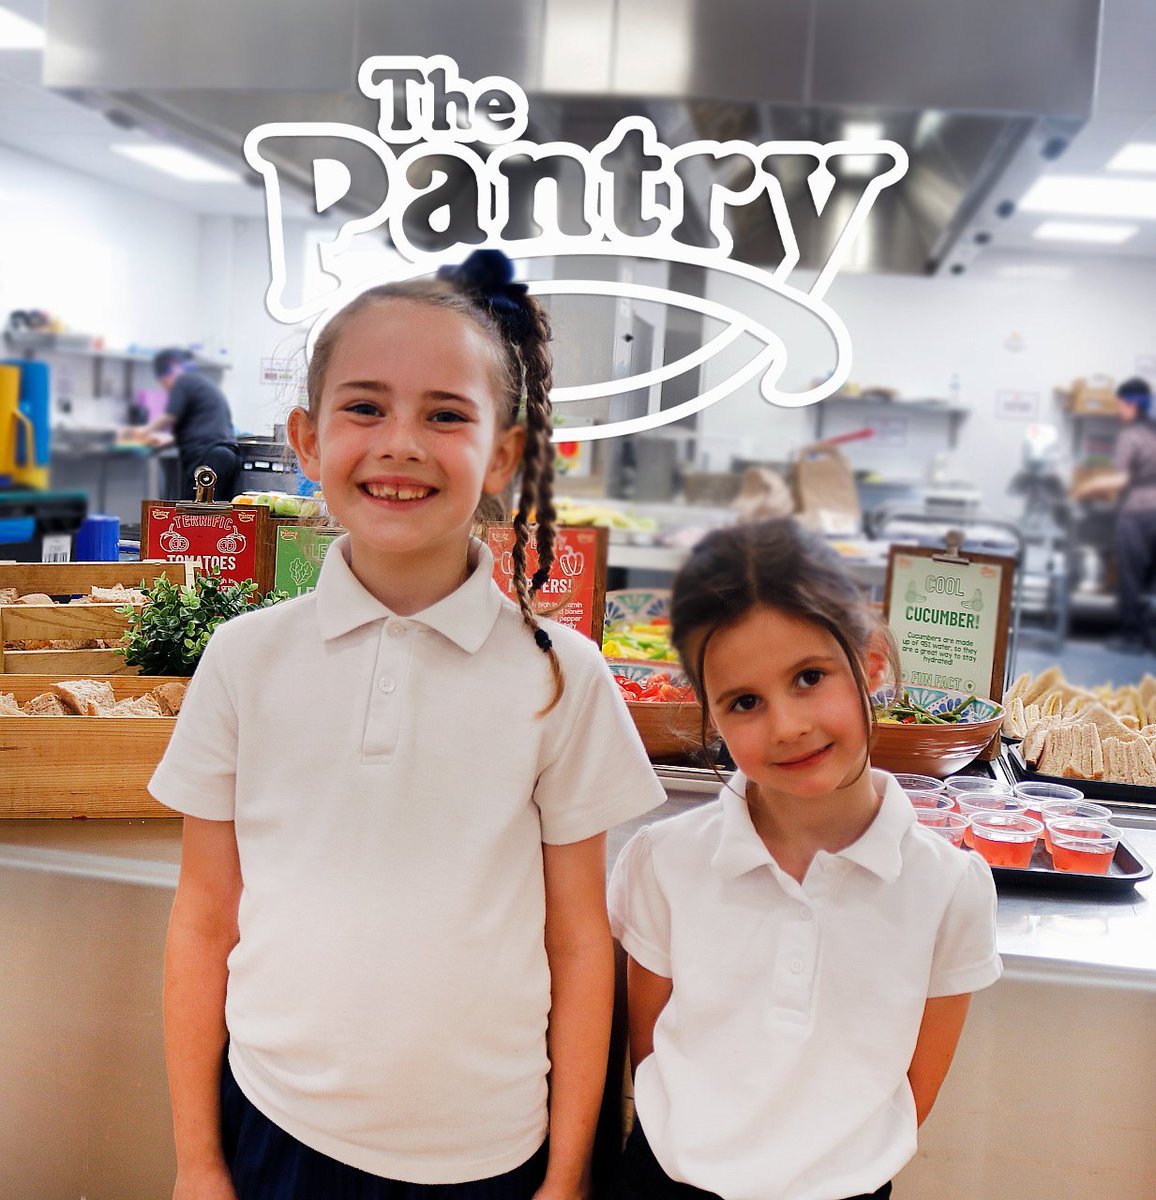 We had some little helpers in one of our schools last week! 
They gave us a hand in getting some training videos done, First step was The Pantry, 
next step Hollywood for their little stars ⭐🎬🎥
#training #littleactors #pantryschools #pantrytraining #thepantry #teampantry